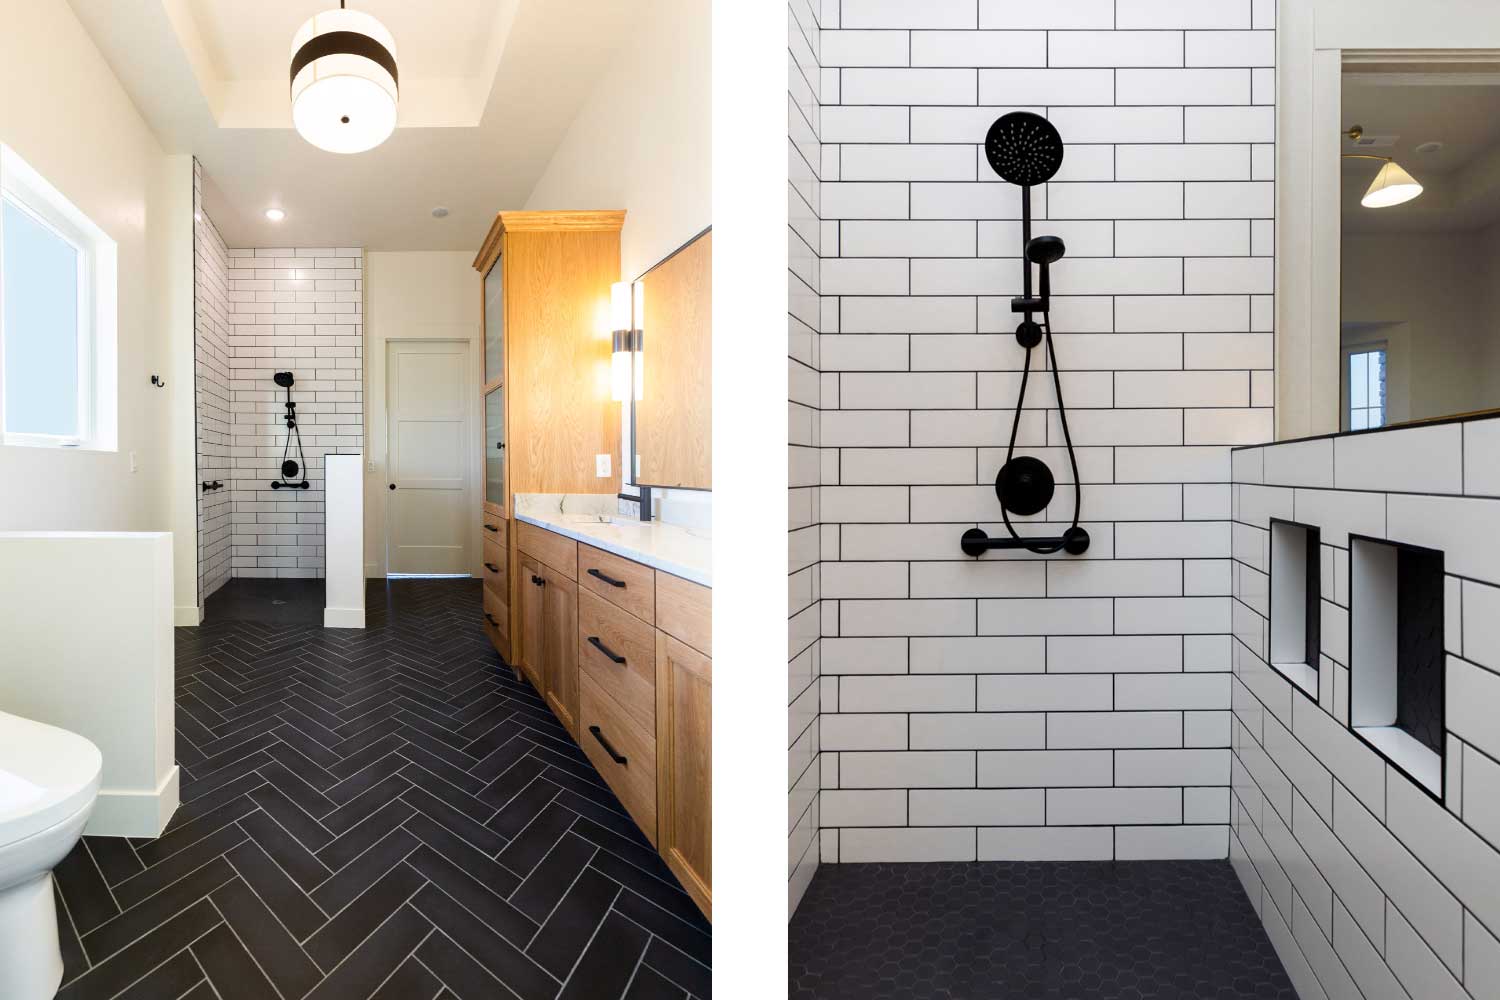 Black and white custom tile work in the primary bathroom